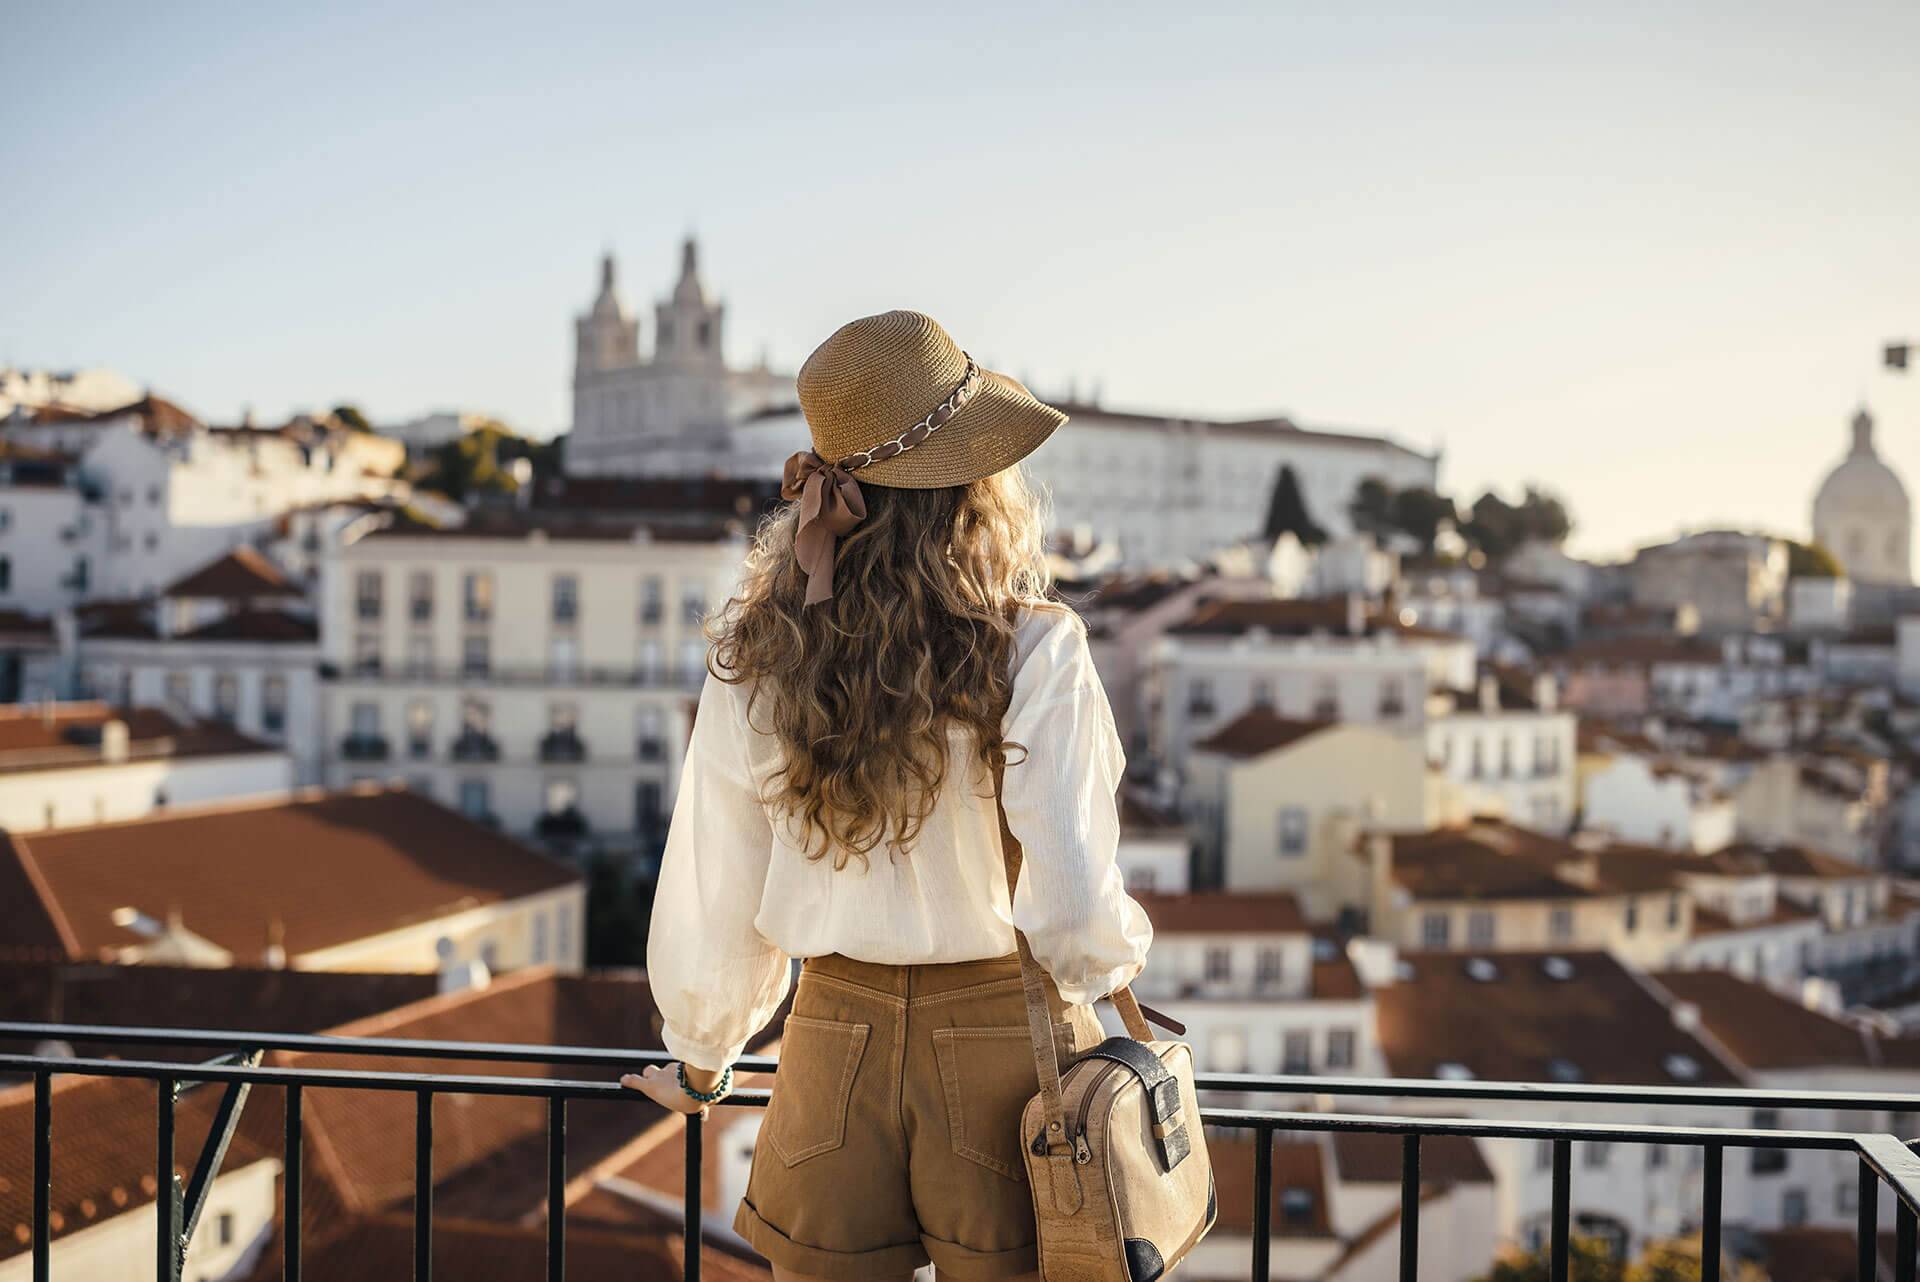 Explore The Beauty of Spain and Portugal on This 8 Days Guided Tour!